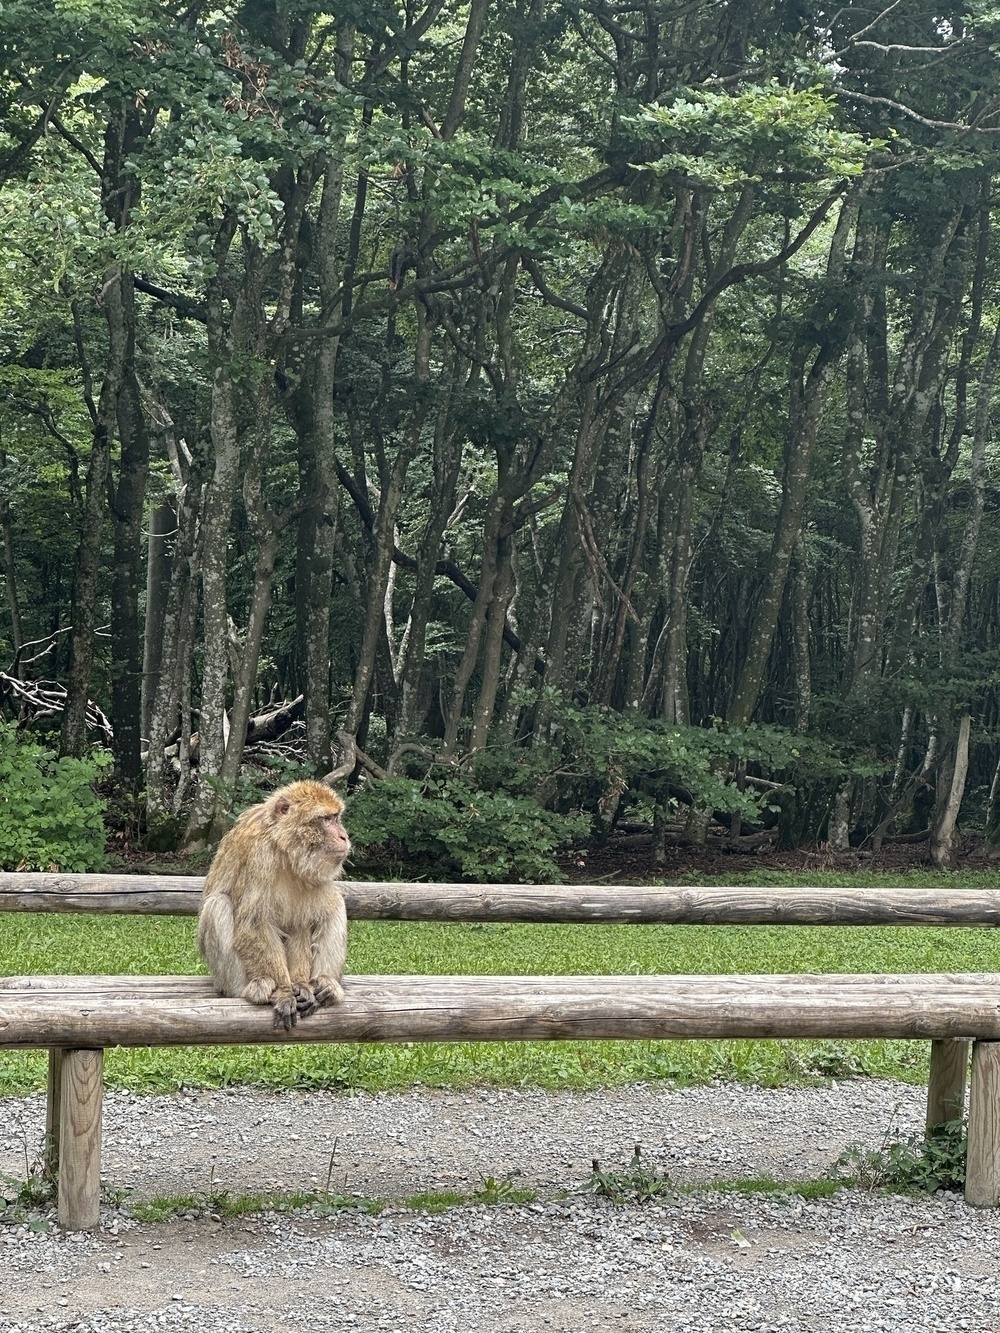 A monkey sits alone on a wooden bench in front of a dense forest.